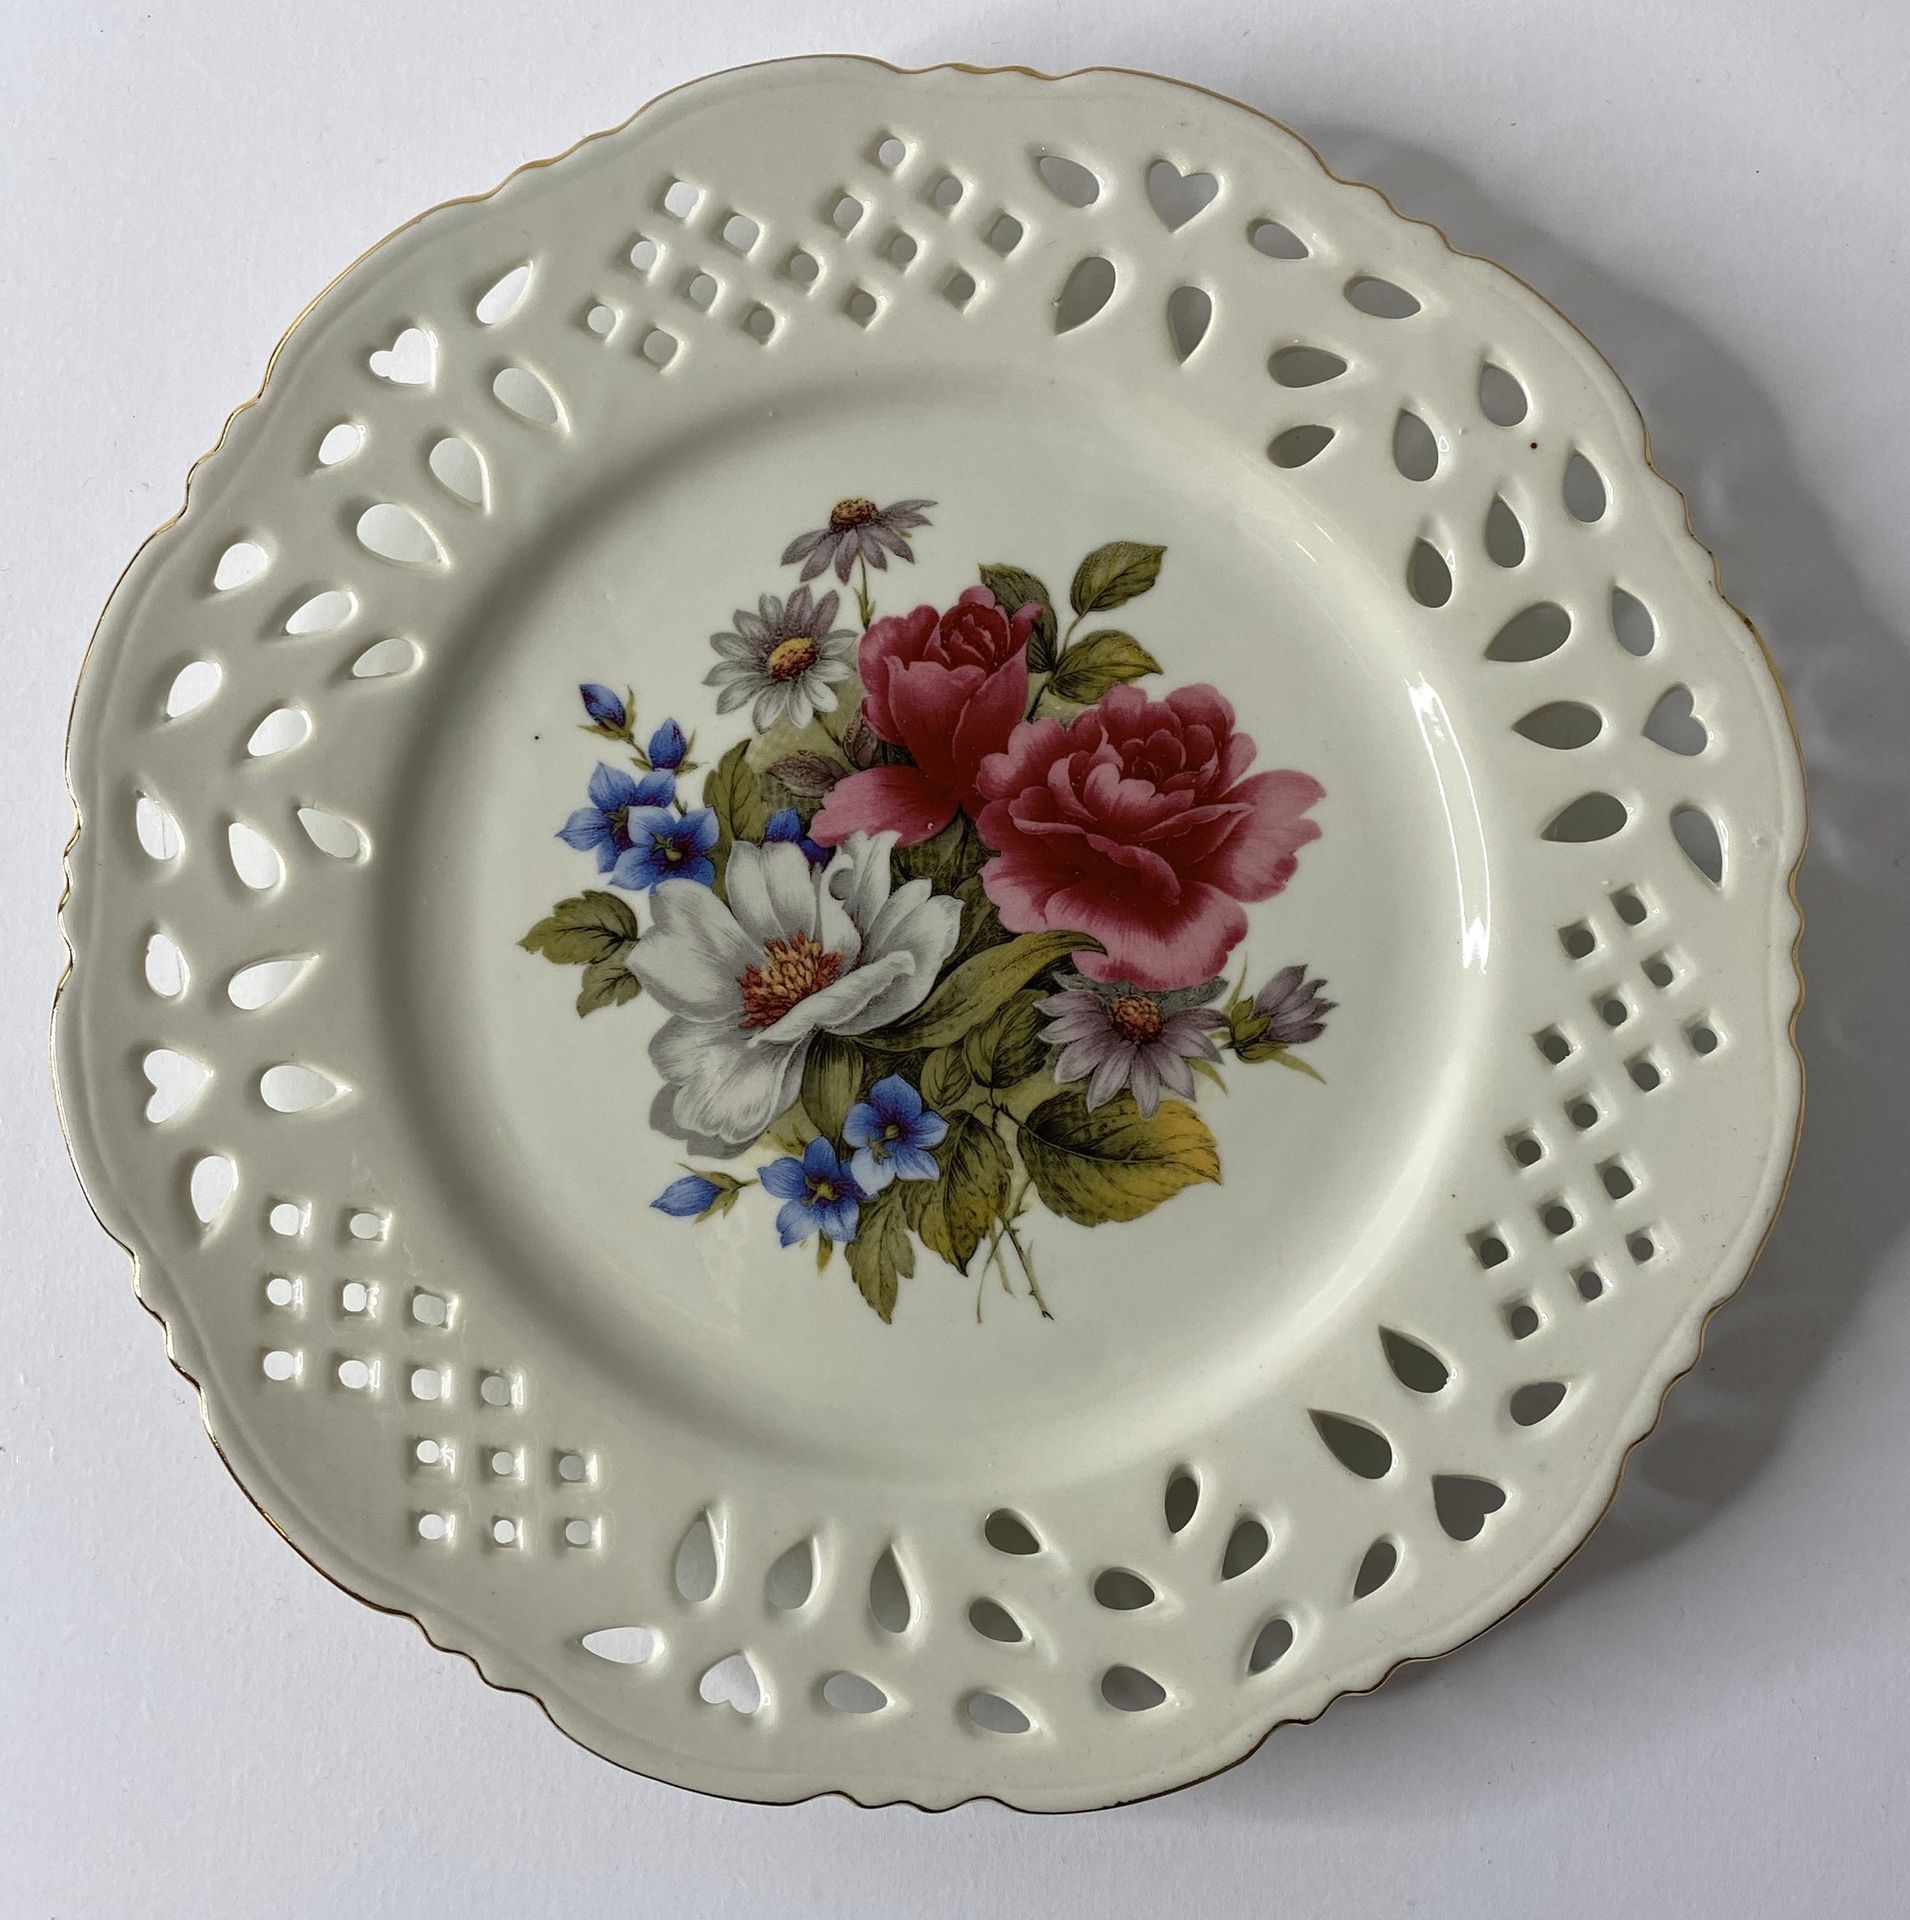 Formalities By Baum Bros Decorative Flower Plate Set Of 3